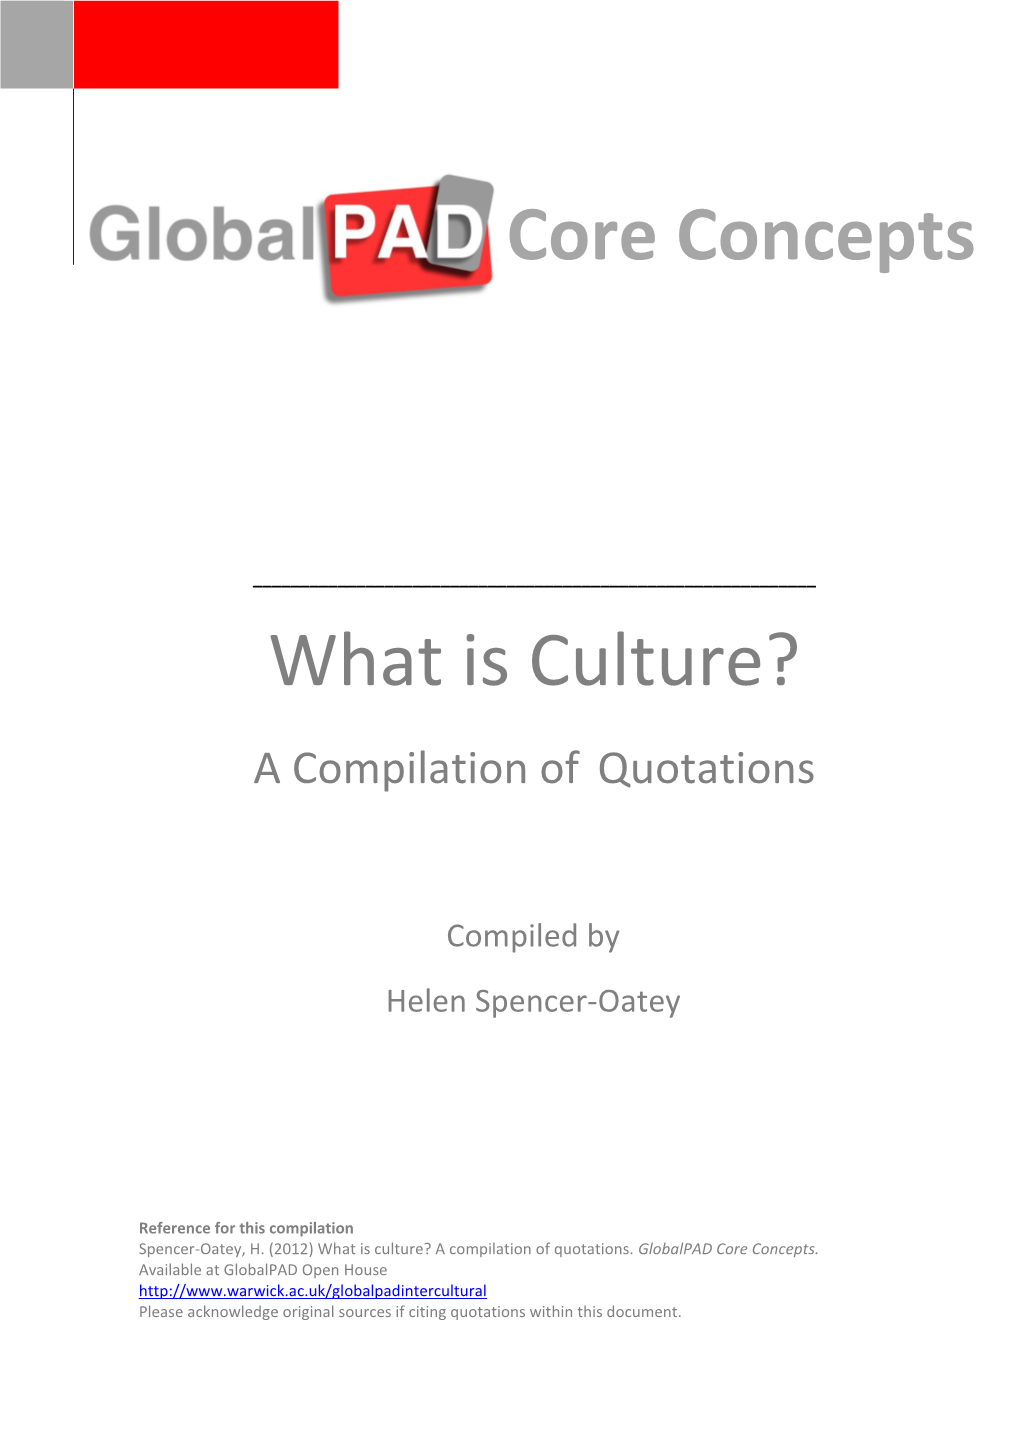 What Is Culture?-A Compilation of Quotations